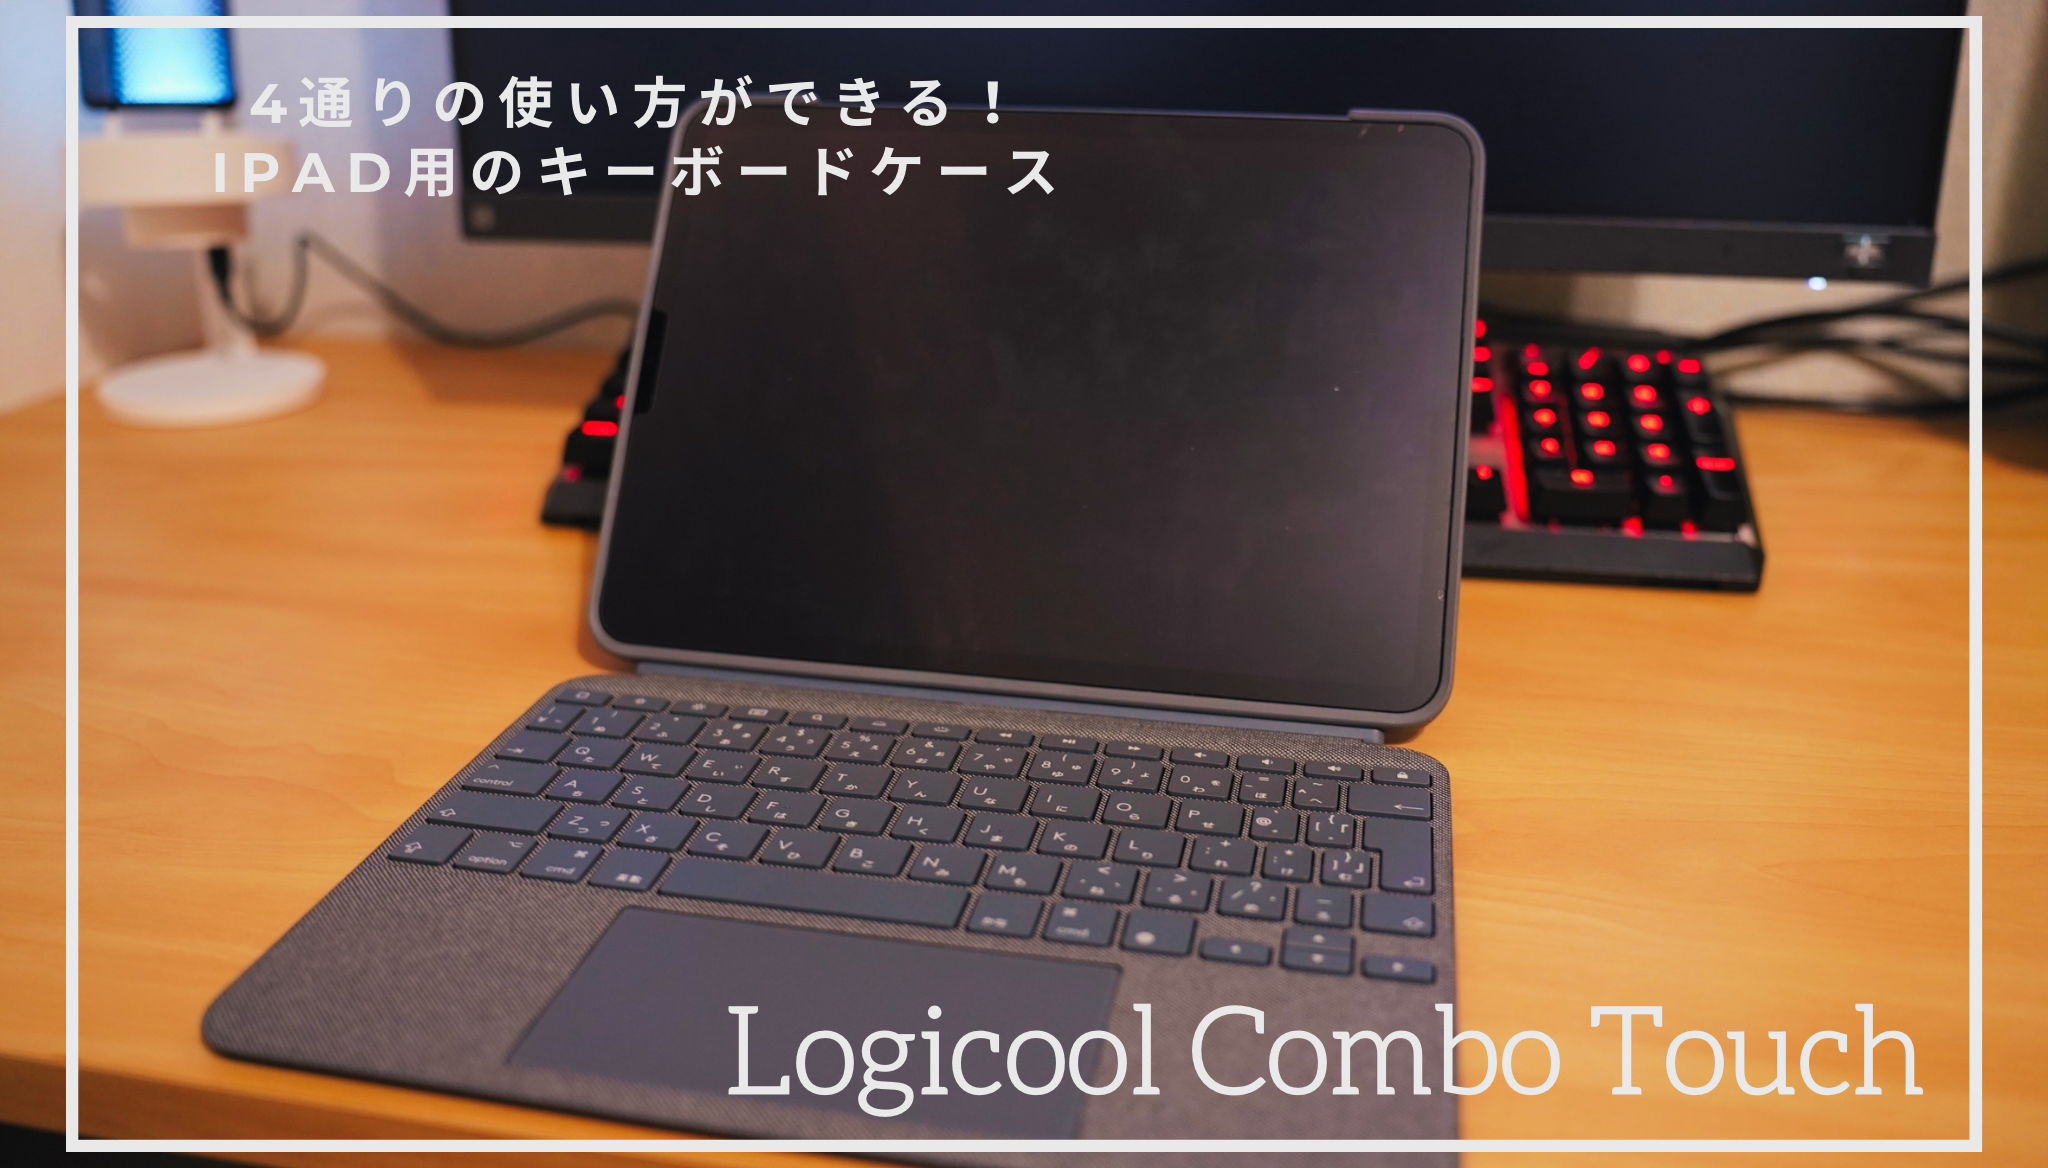 iPadをPC化！作業効率がアップする製品「Logicool Combo Touch for 